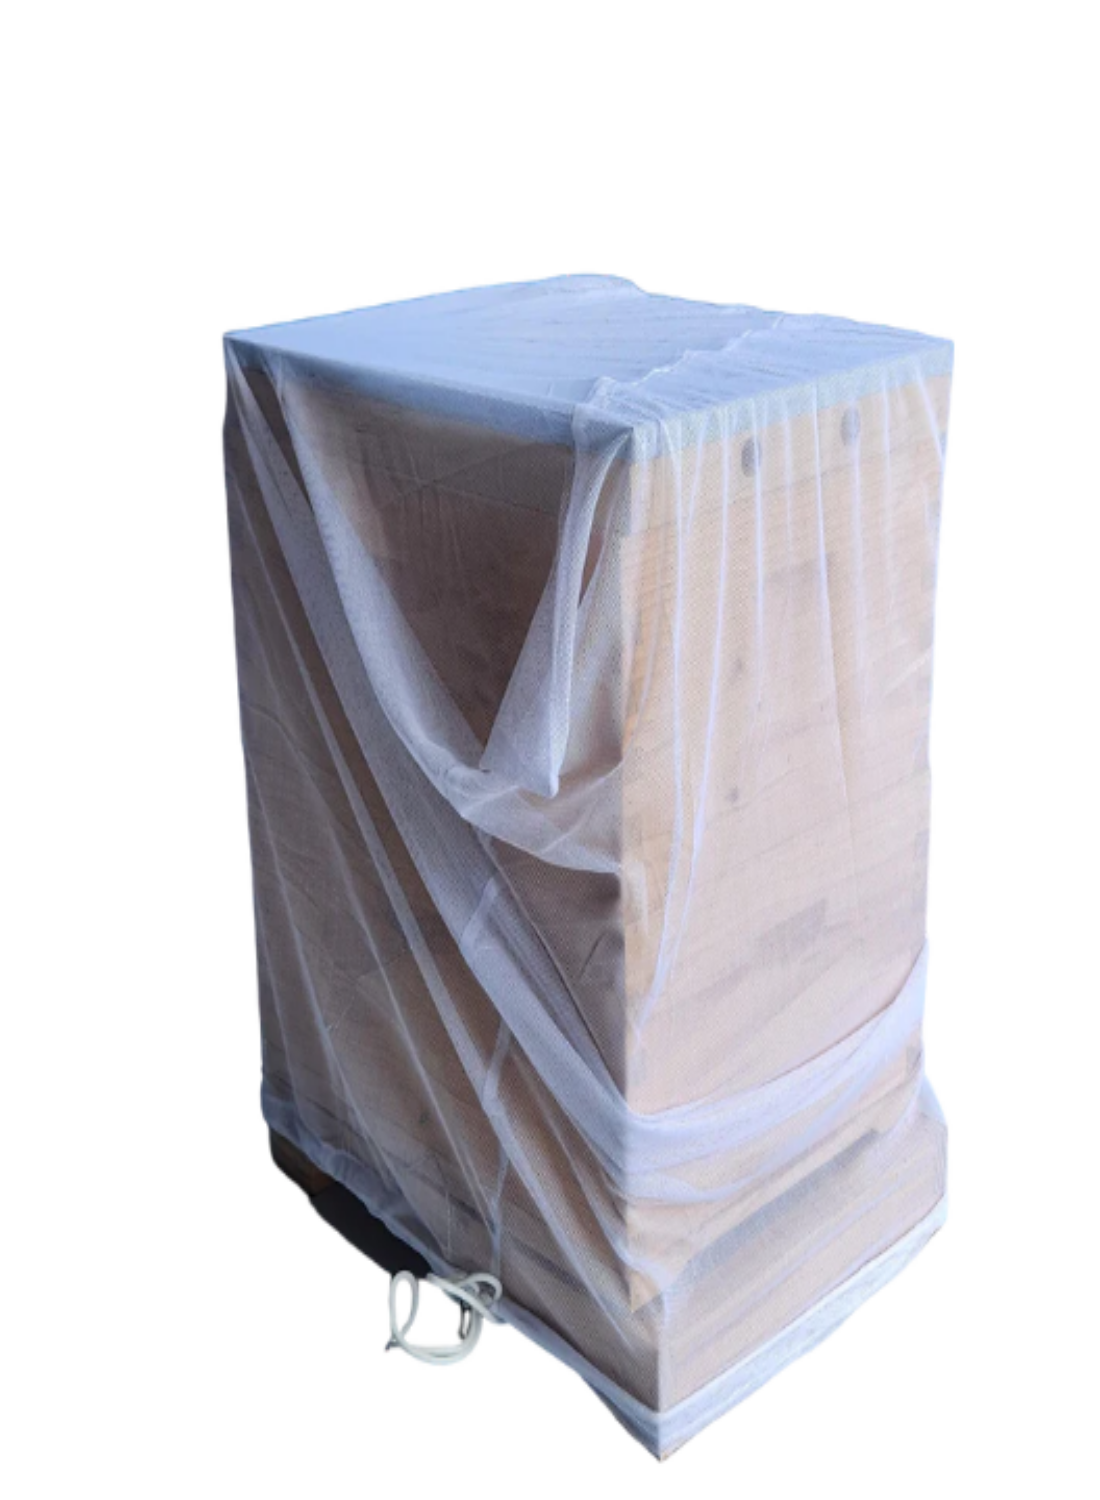 Beehive and NUC Mesh cover for Transportation